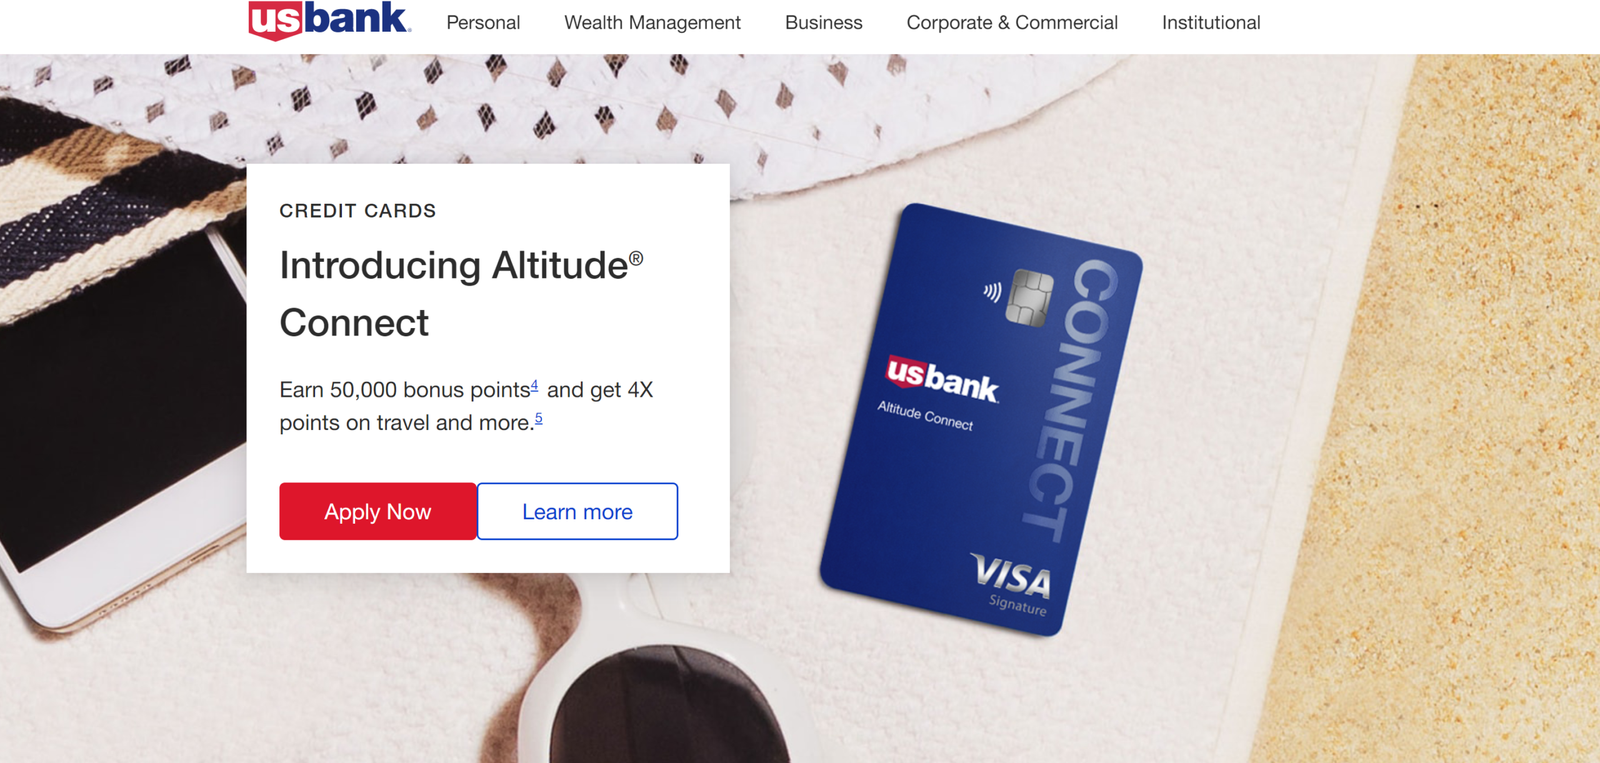 Apply For US Bank Credit Card Online